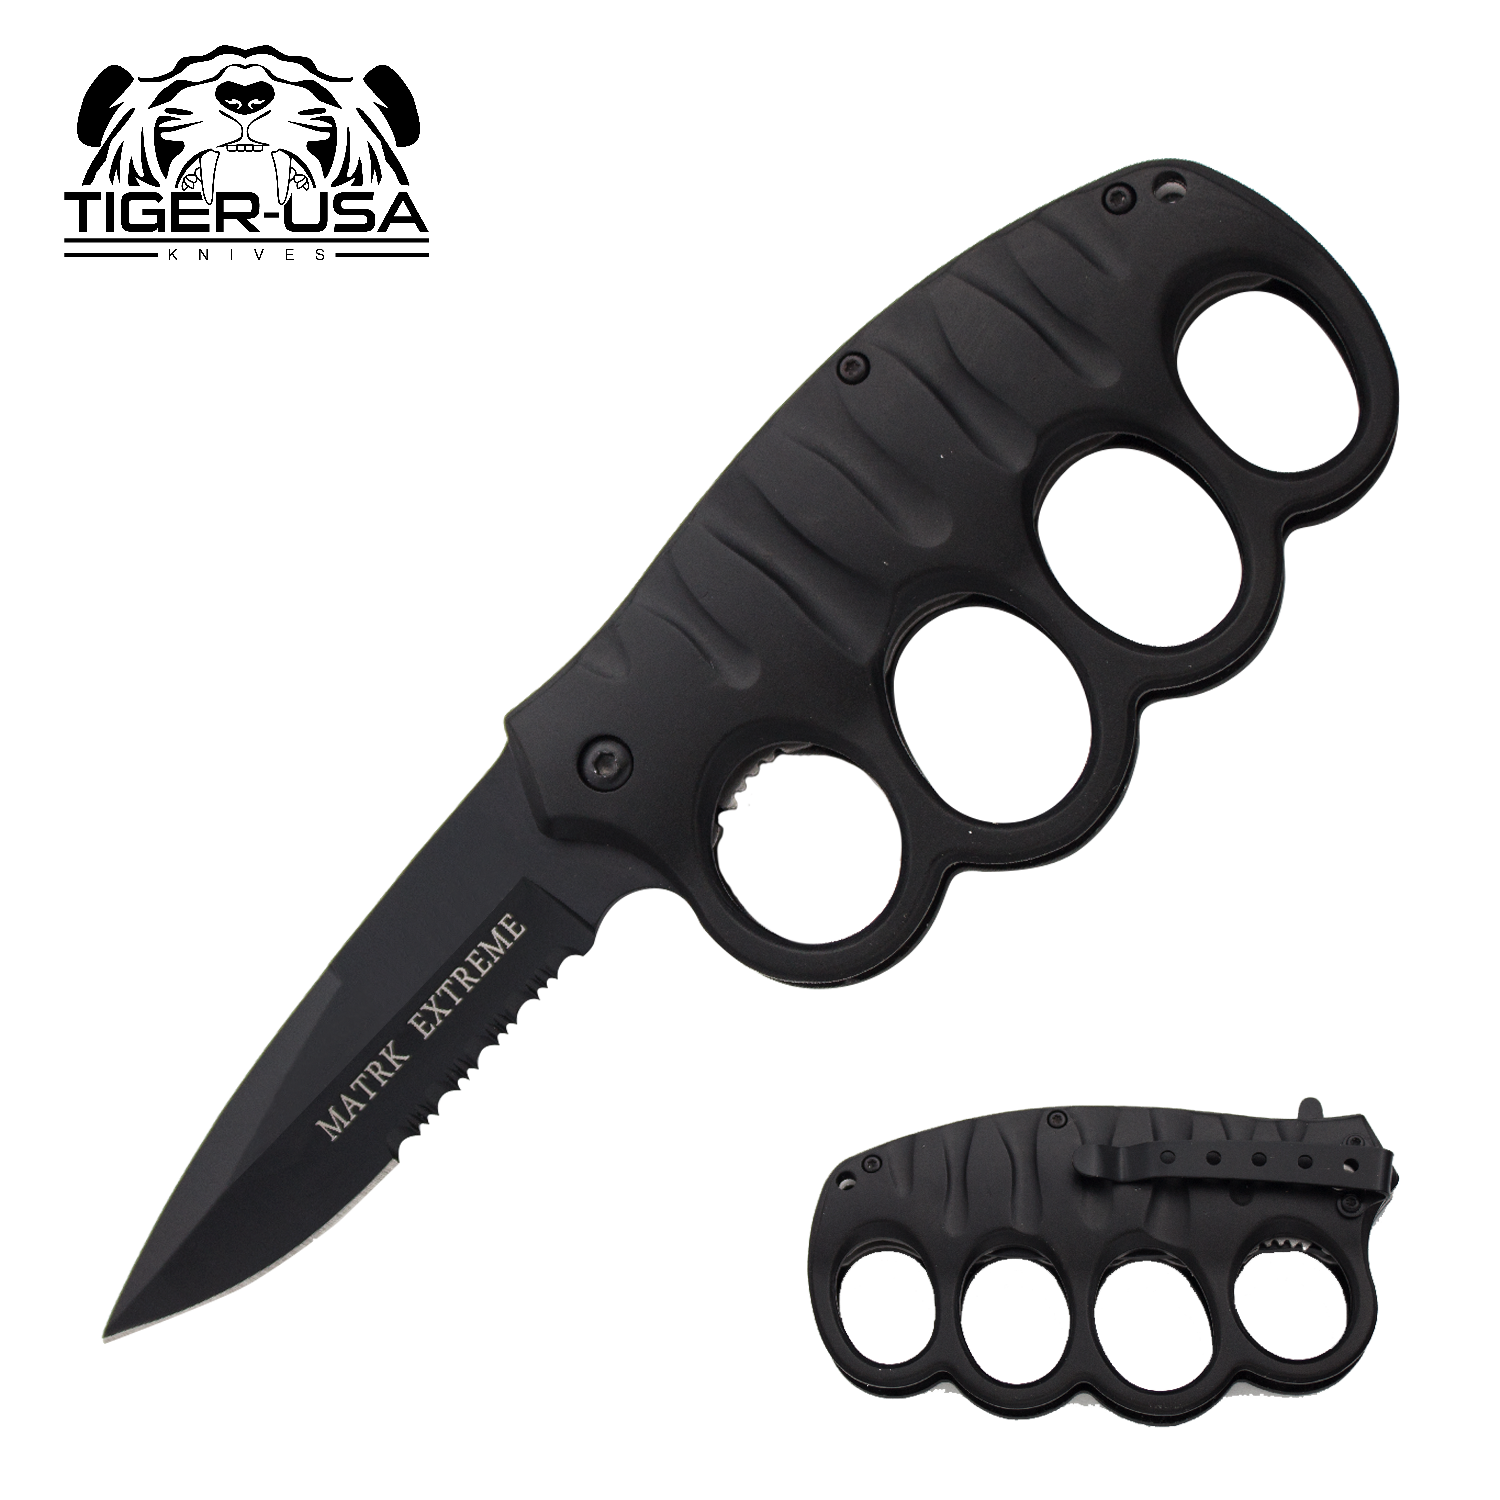 Tiger USA Matryk Extreme Action Trench Knife